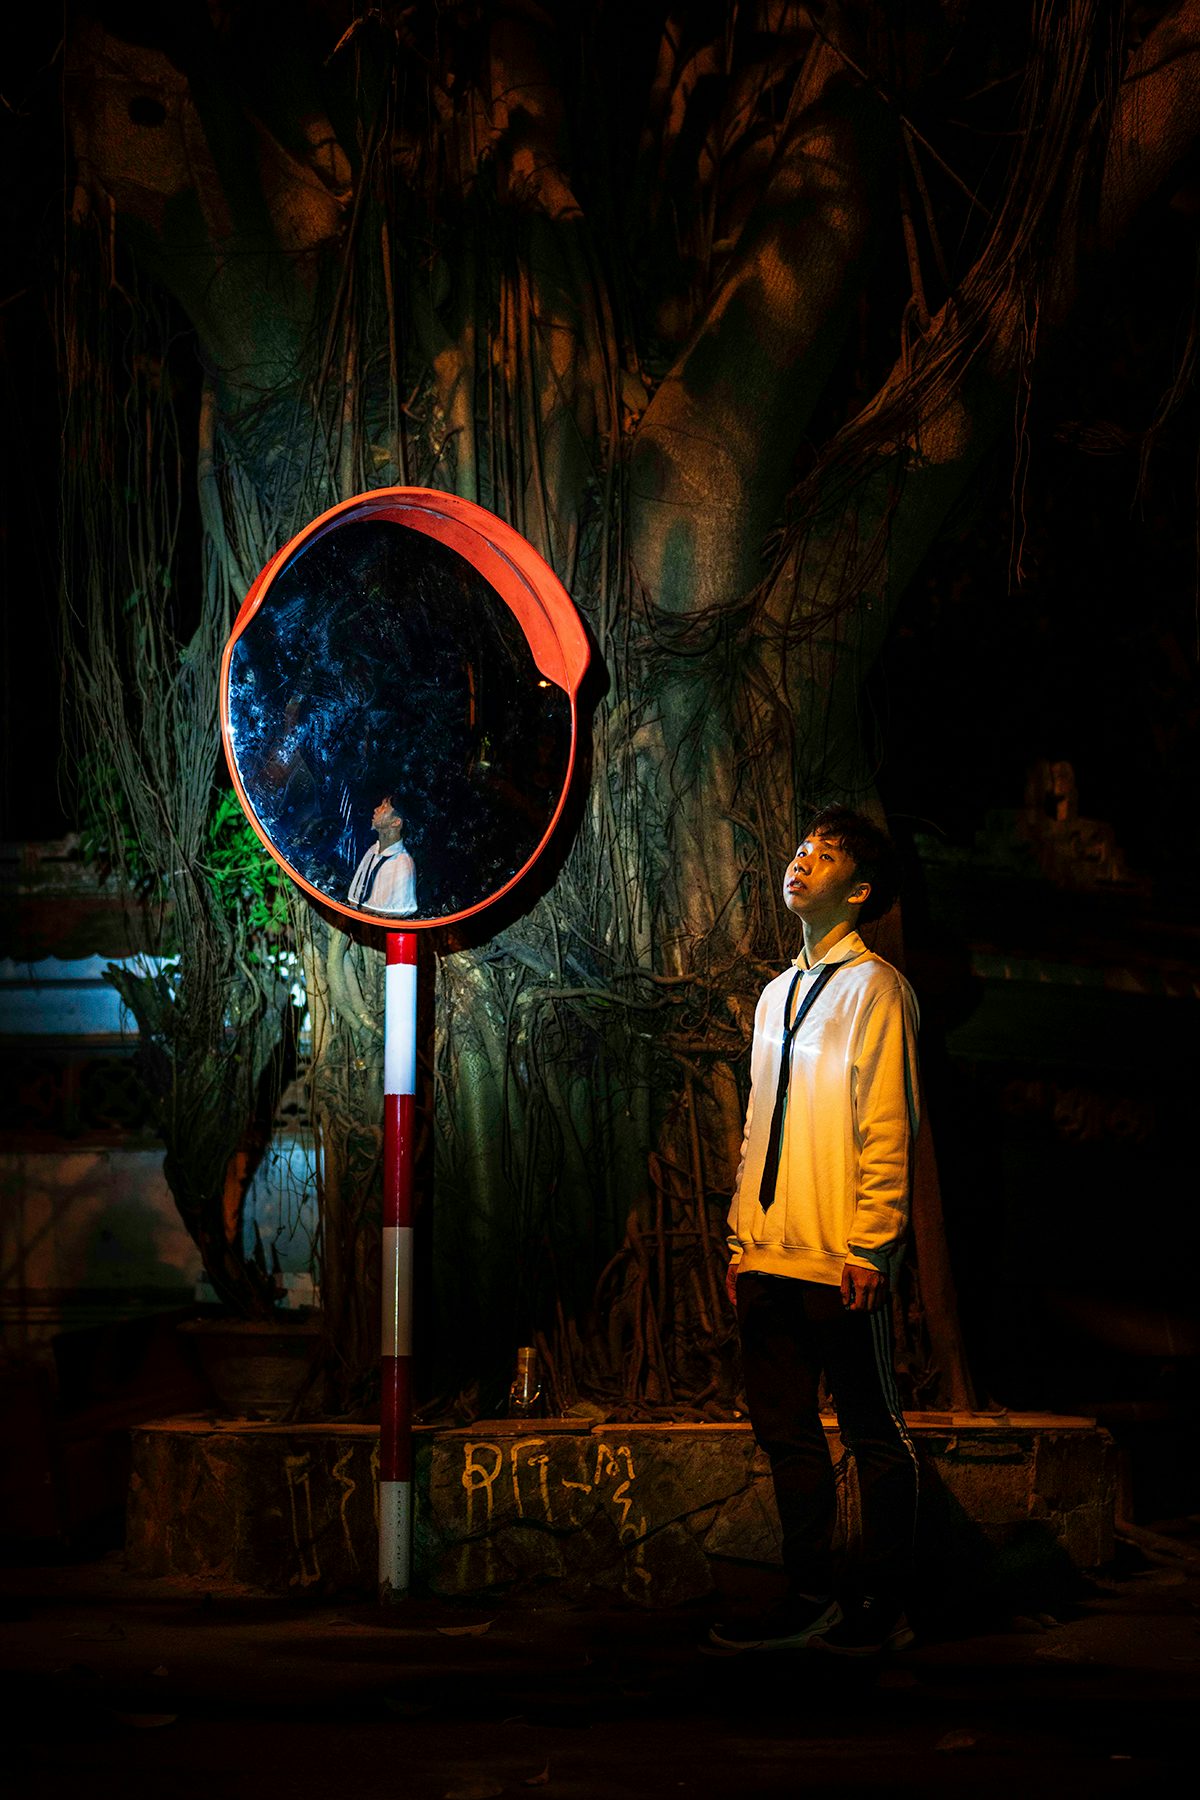 Photograph of a person stood under moonlight next to a mirror by Tri Nyugen